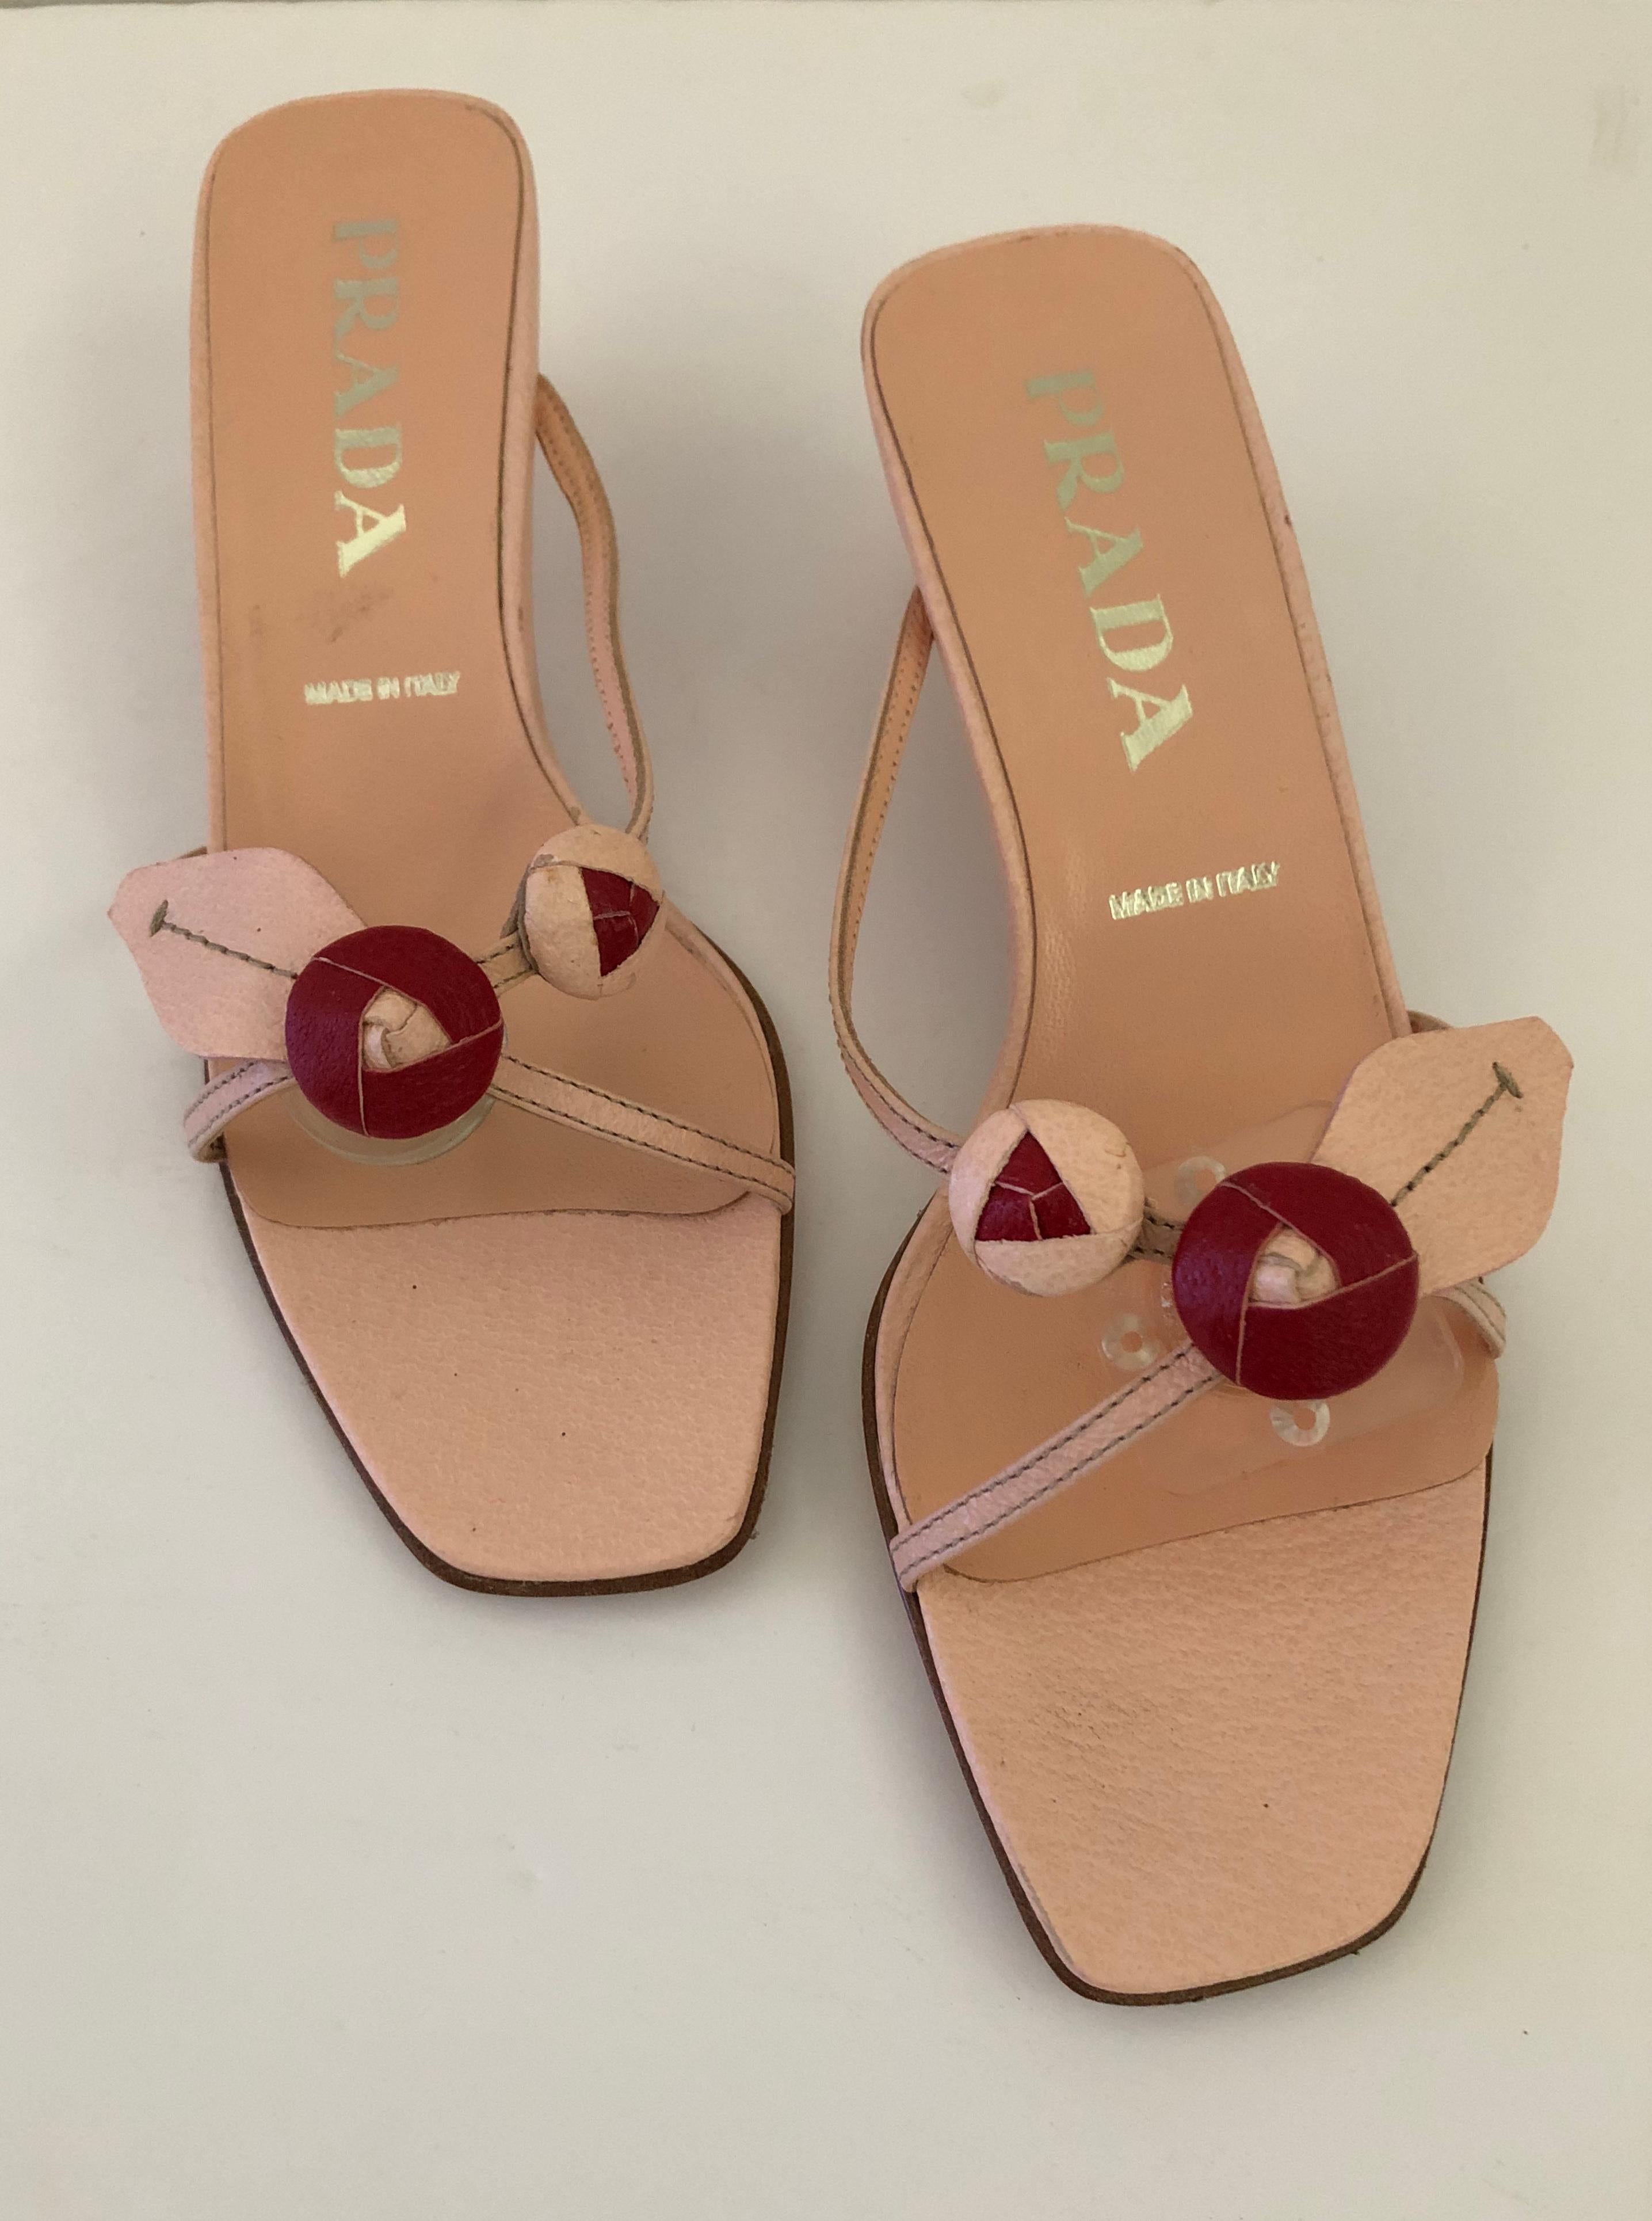 Prada handmade pink and red leaf and berry handmade vintage unworn Sandals, size 36 US size 6 with original partial label, made in Italy. Beautiful detail.